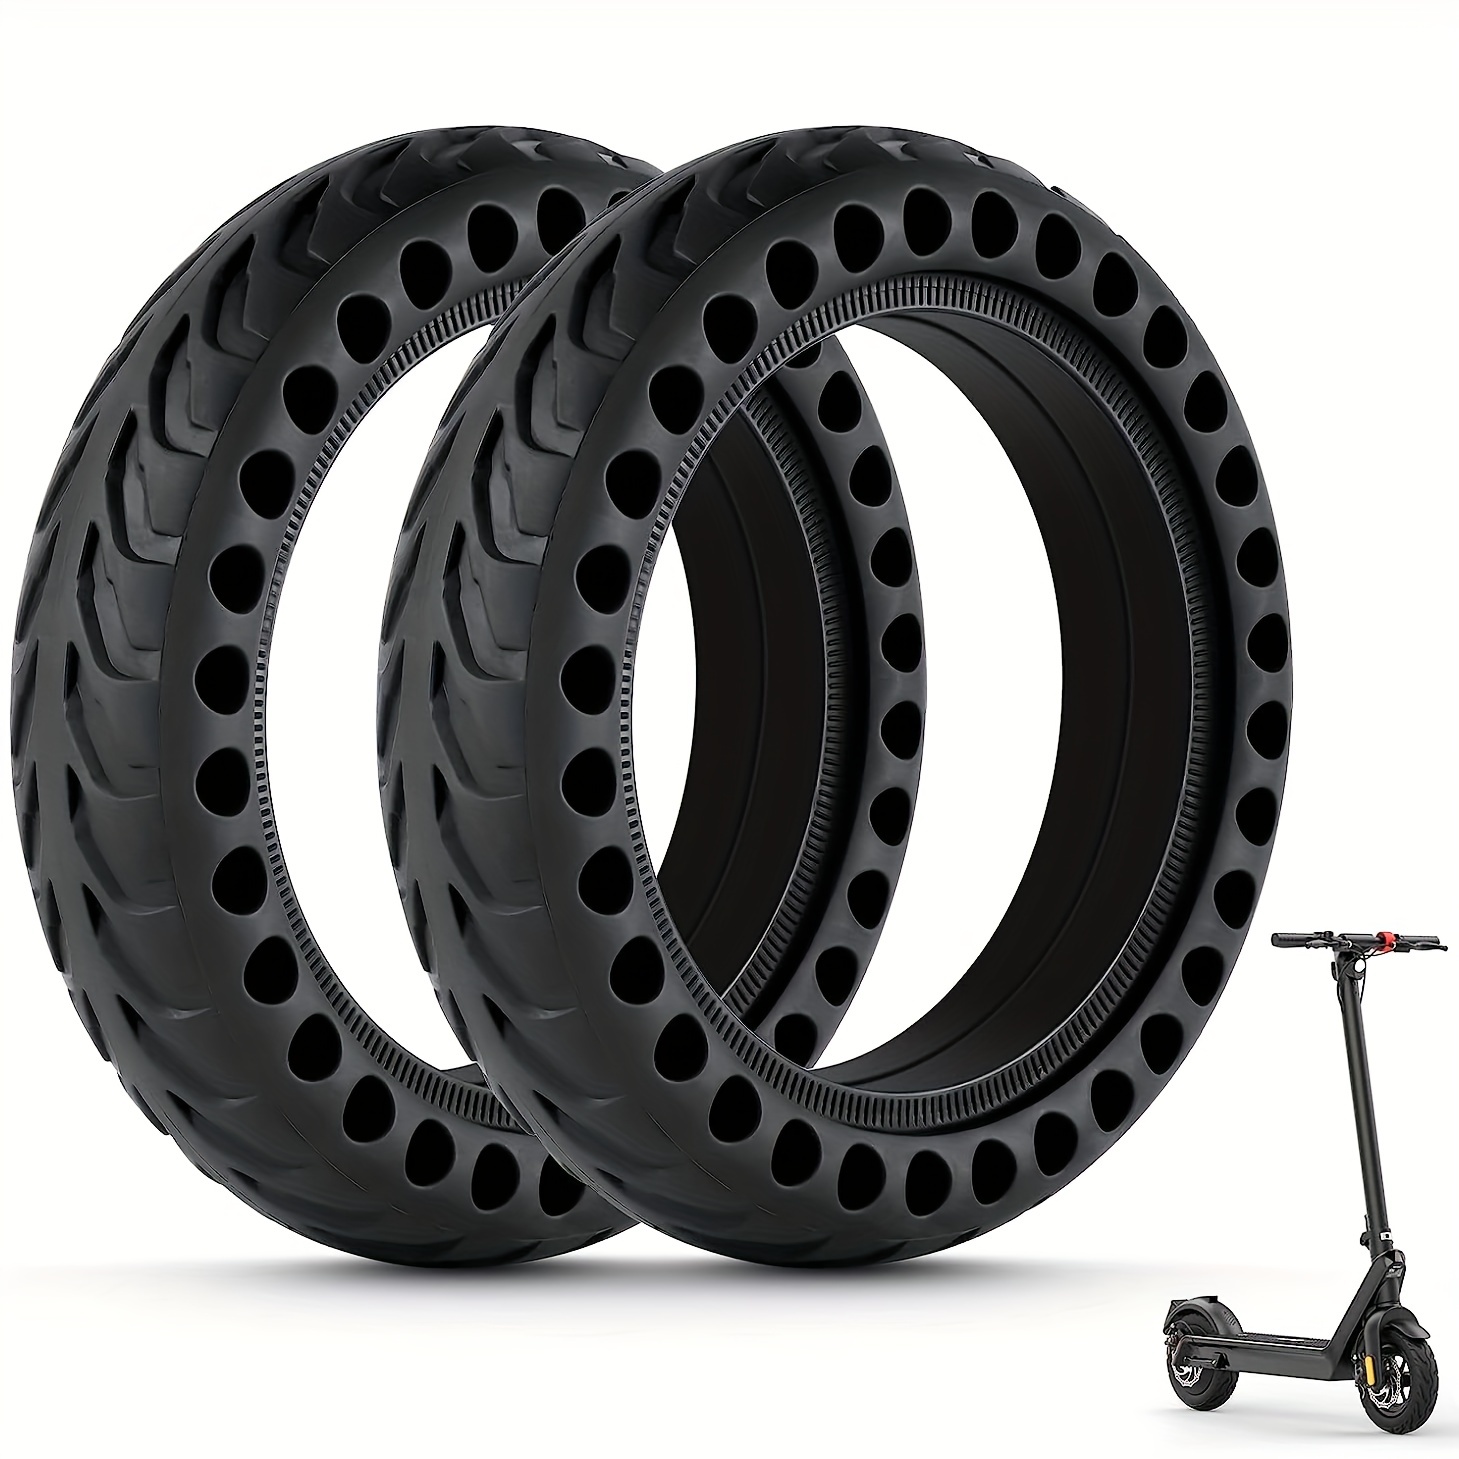 8.5x3.0 8.5Inch Pneumatic outer Tire Inflatable Tyre for Electric